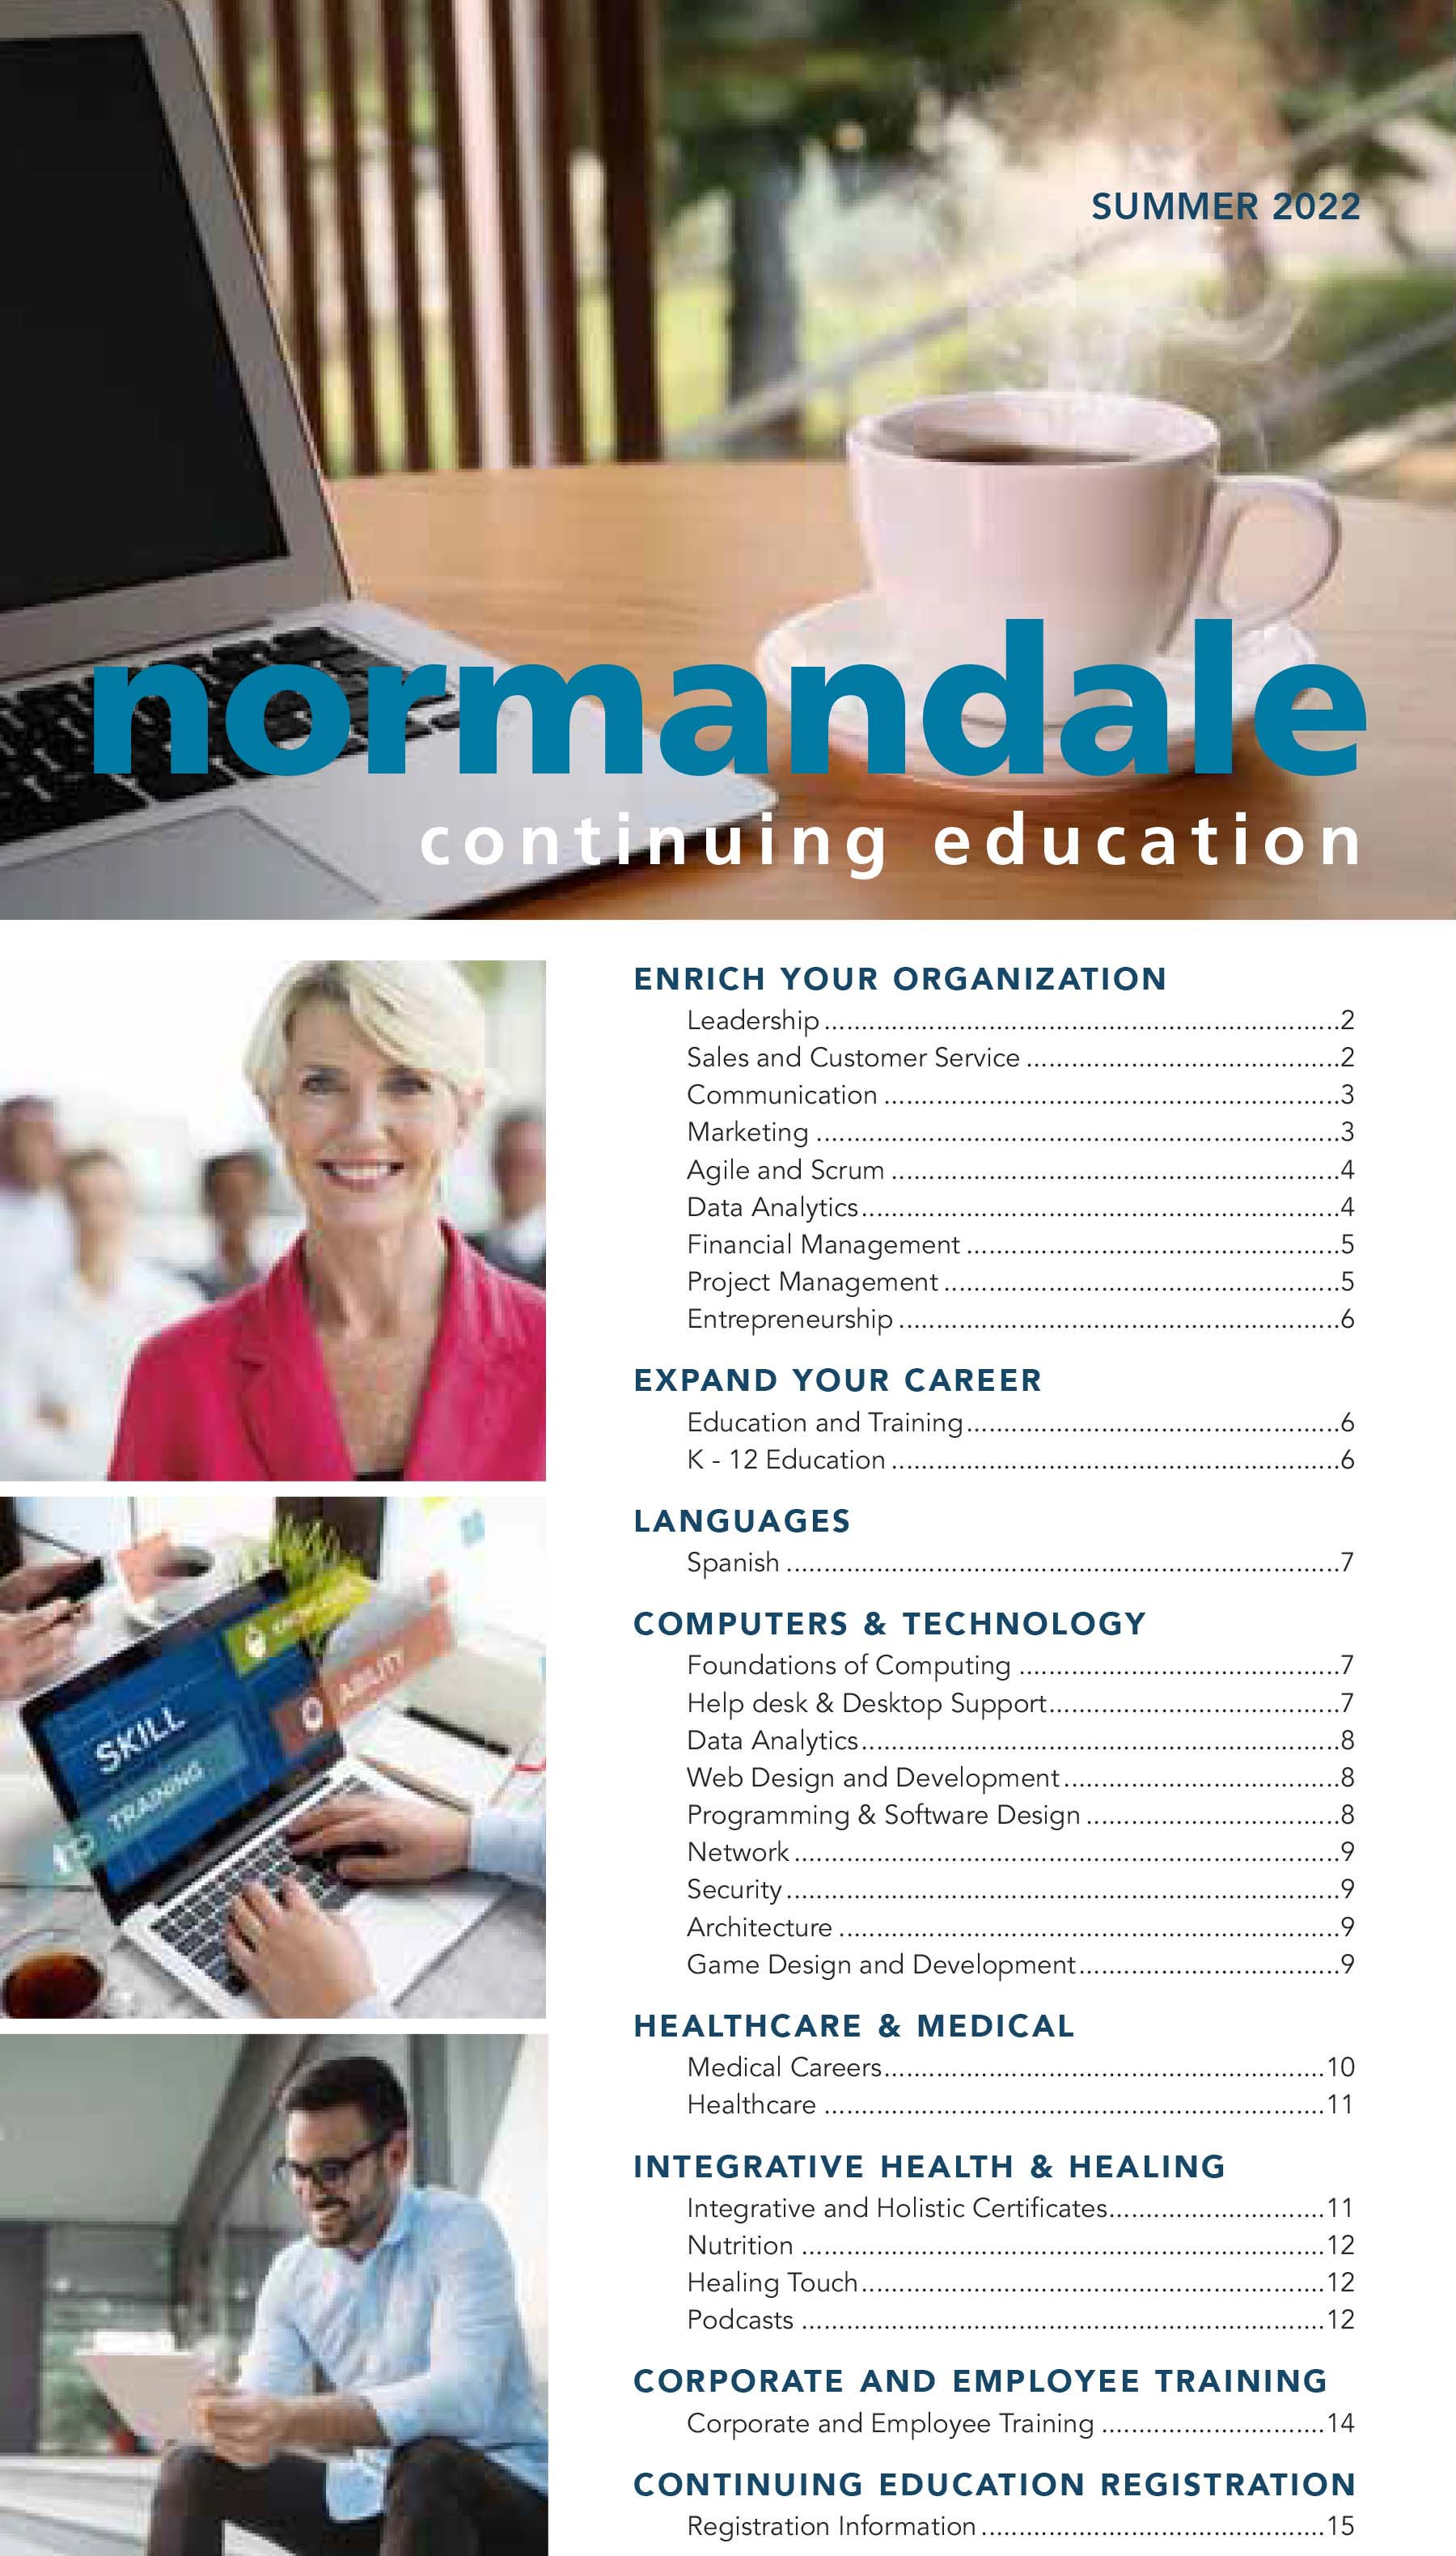 Normandale Continuing Education Summer 2022